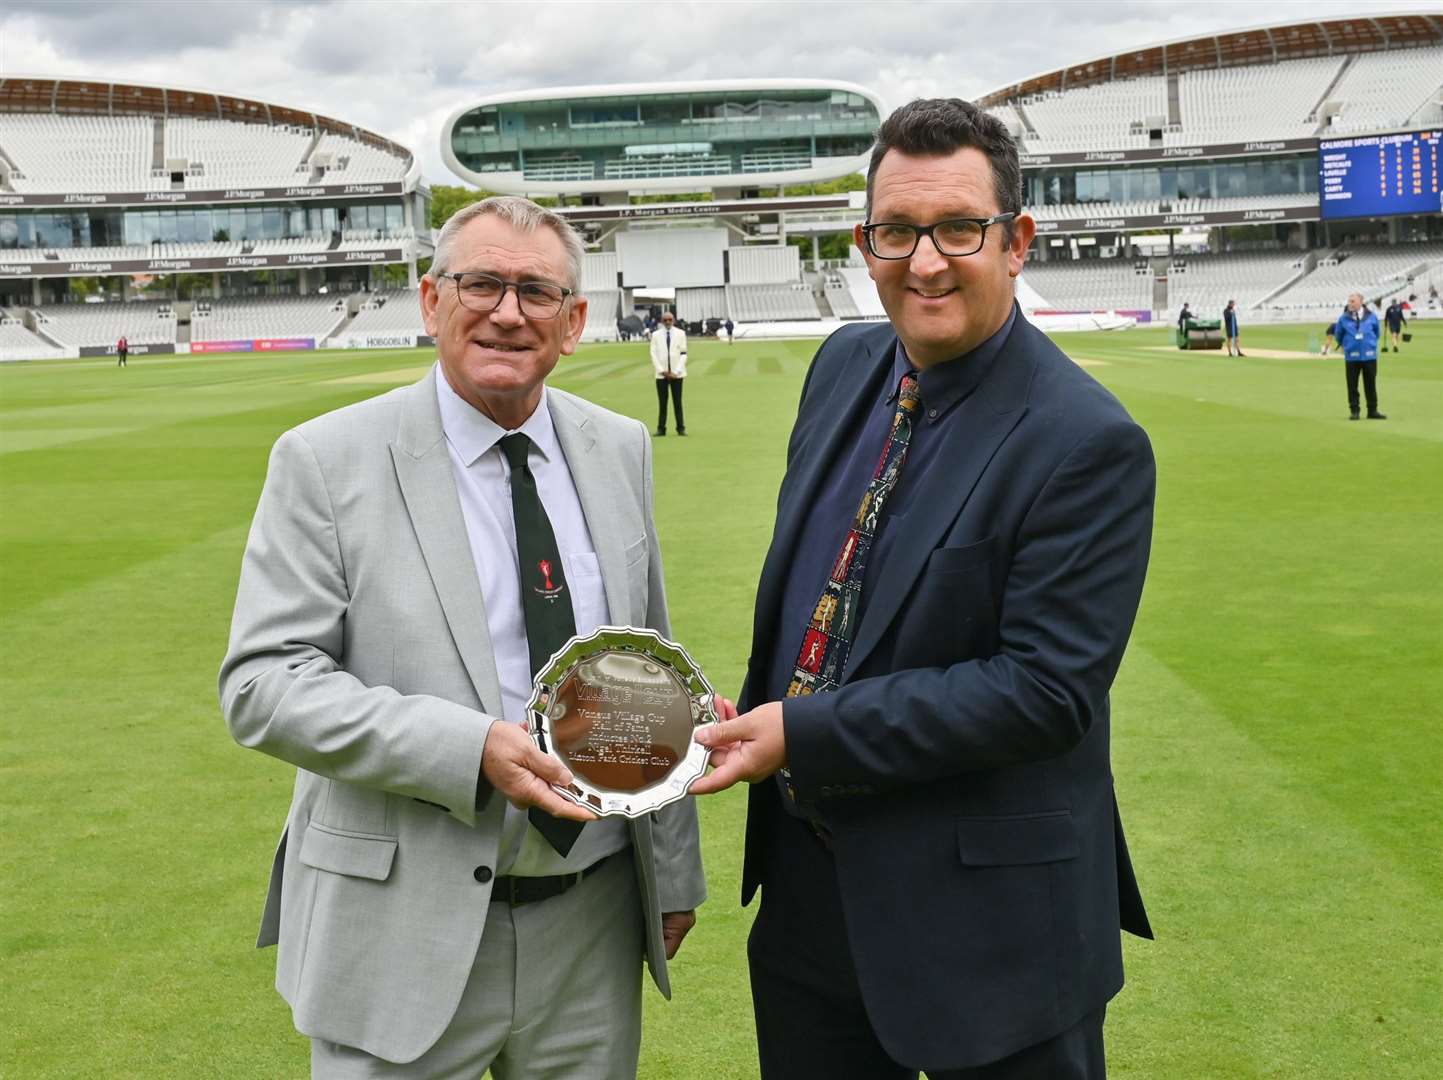 Nigel Thirkell receives his Hall of Fame silver salver from Huw Turbervill, editor of The Cricketer magazine Picture: Paul Carroll Photography